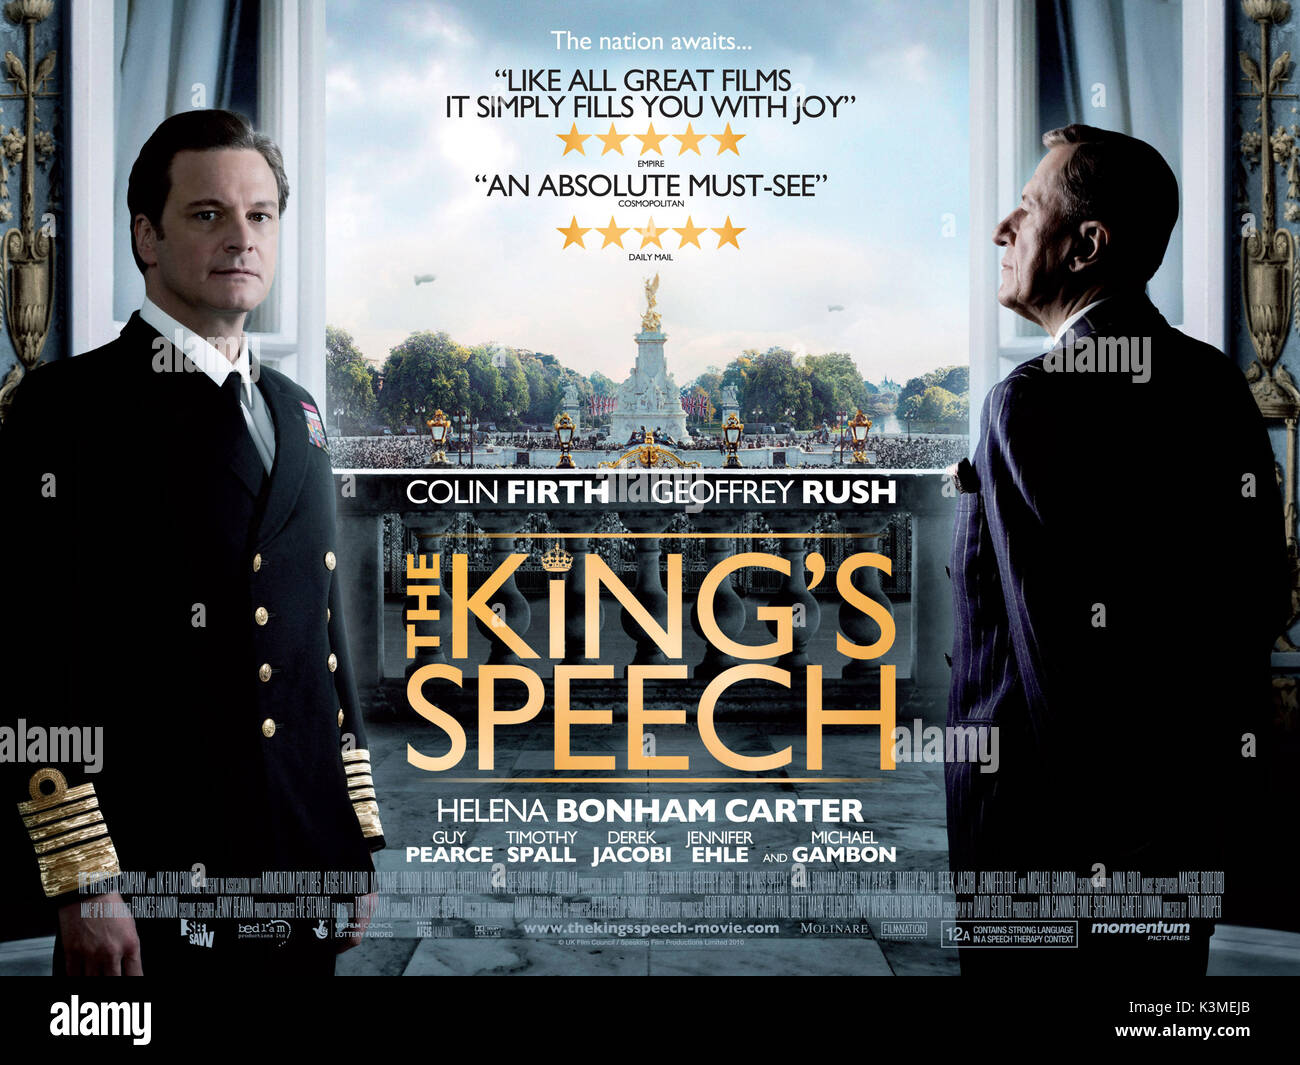 THE KING'S SPEECH [BR 2010] COLIN FIRTH as King George VI, GEOFFREY RUSH as Lionel Logue     Date: 2010 Stock Photo